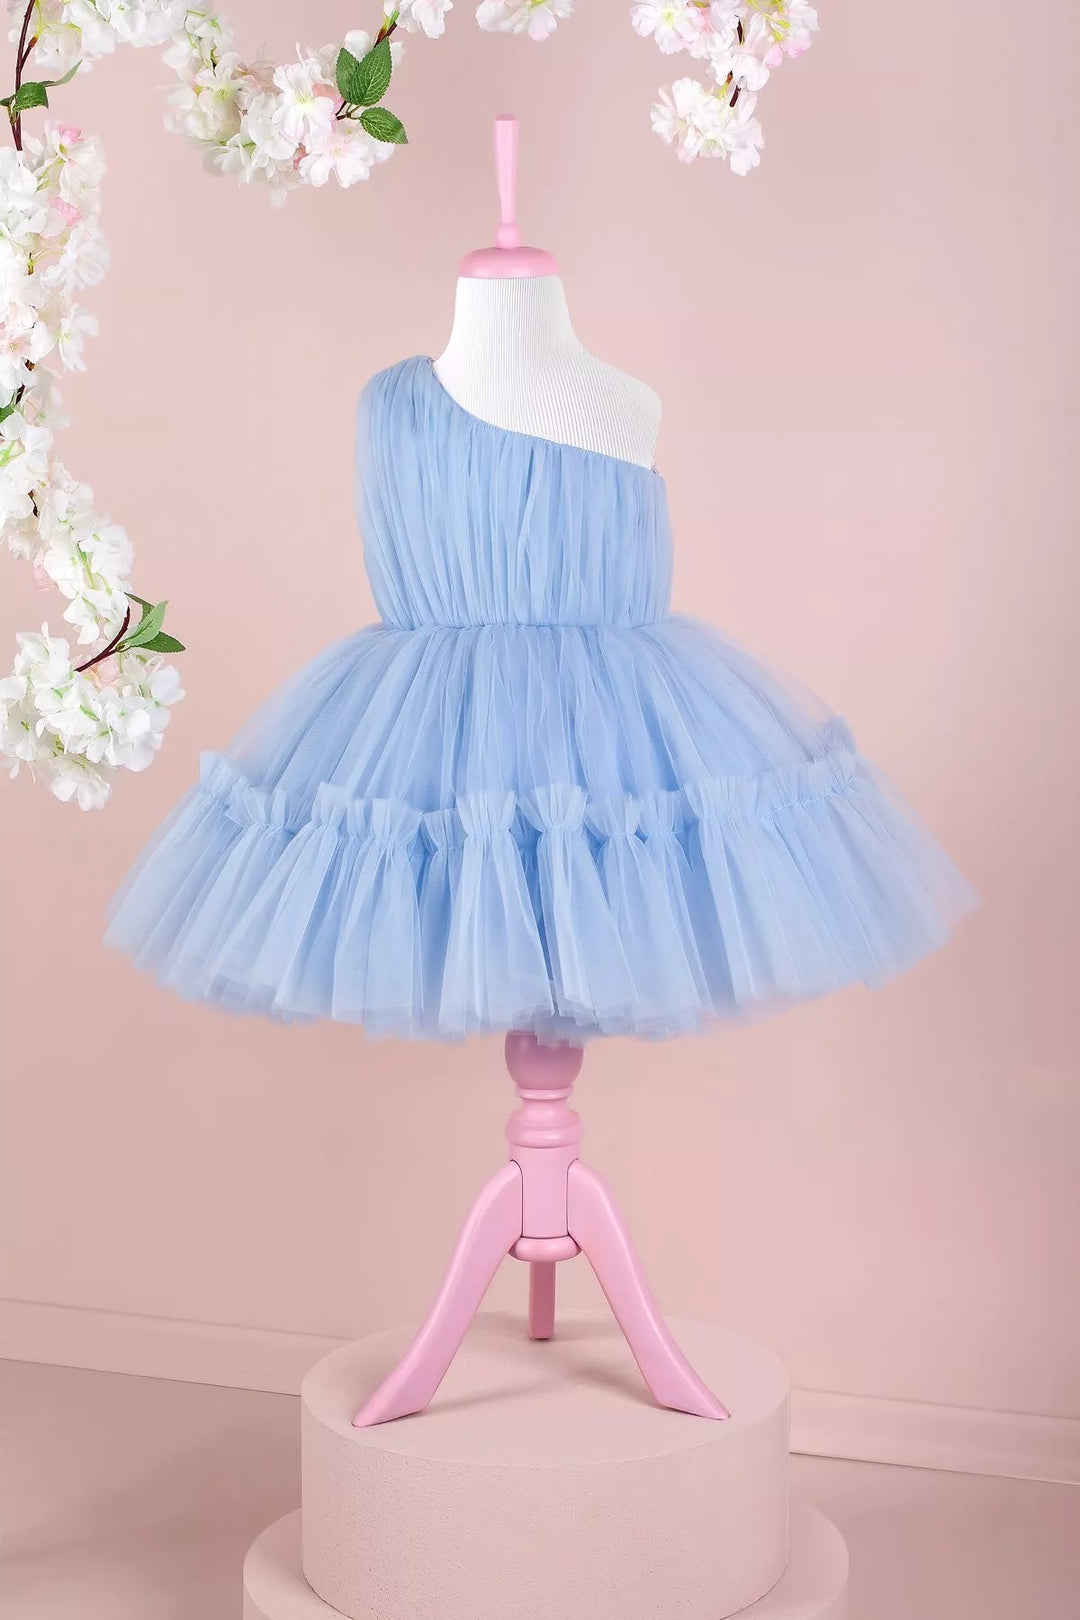 A baby blue one shoulder open sleeveless Smurf concept dress that has knee length shirred skirt